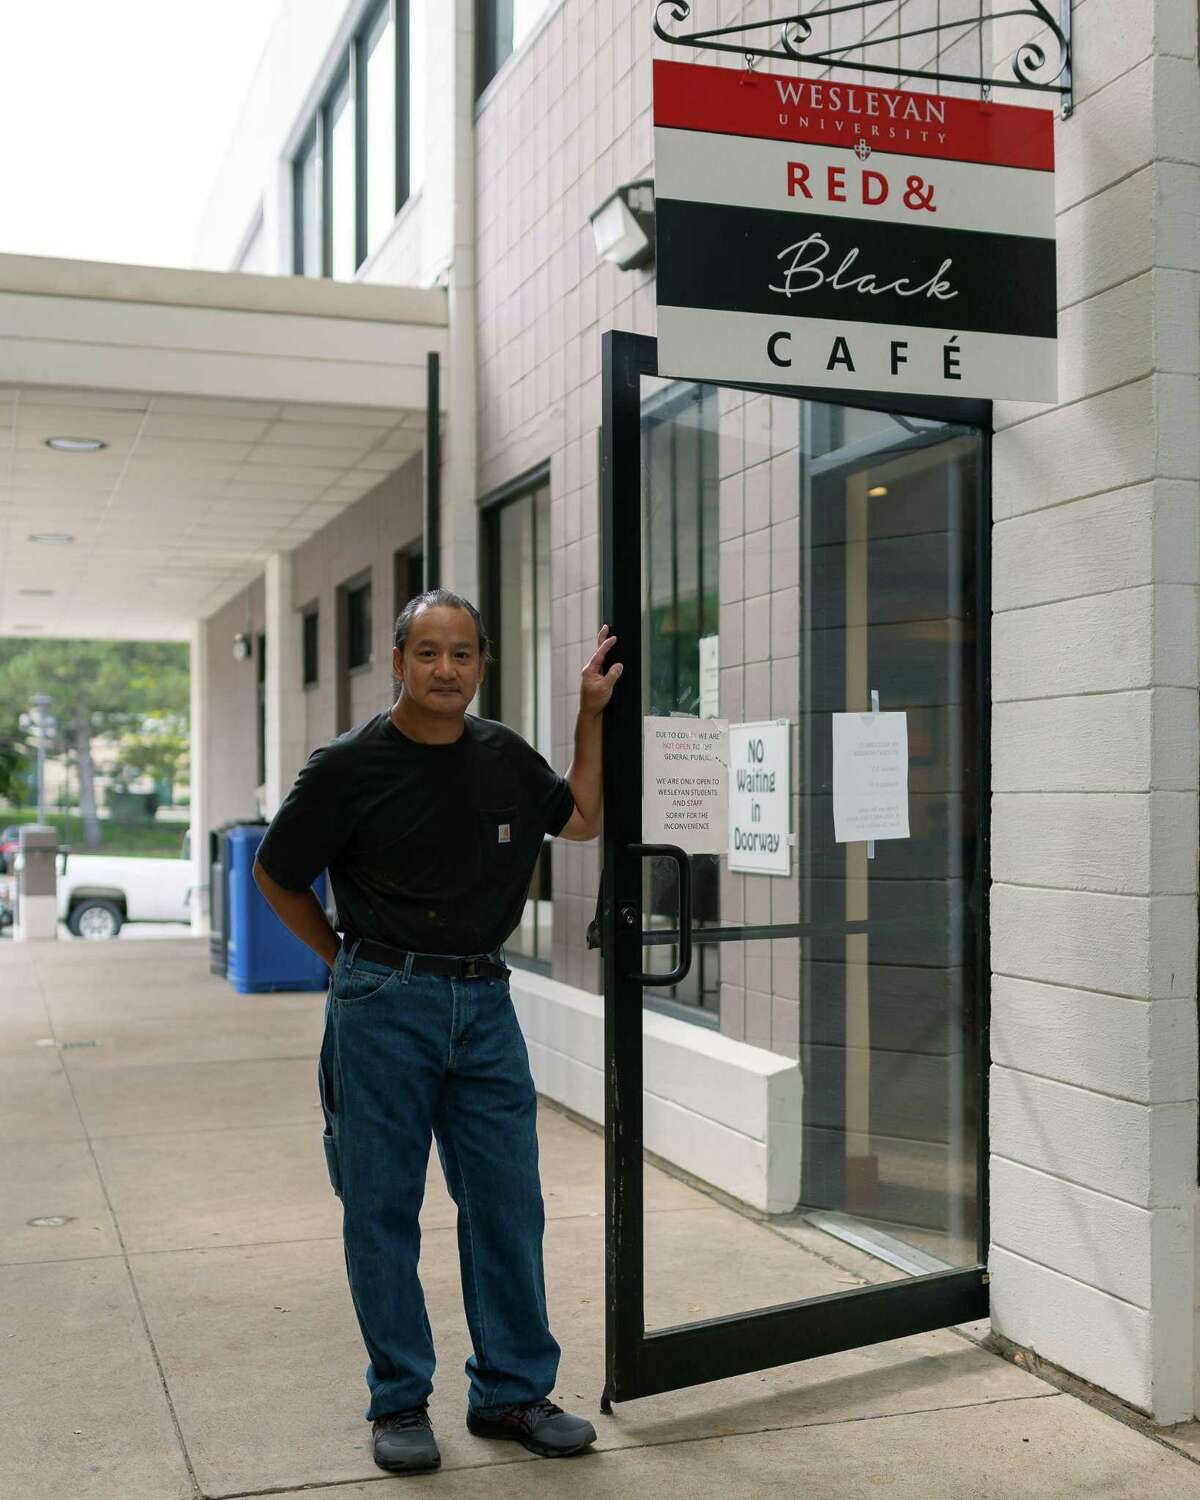 Christopher works at the Red & Black Cafe in Middletown.